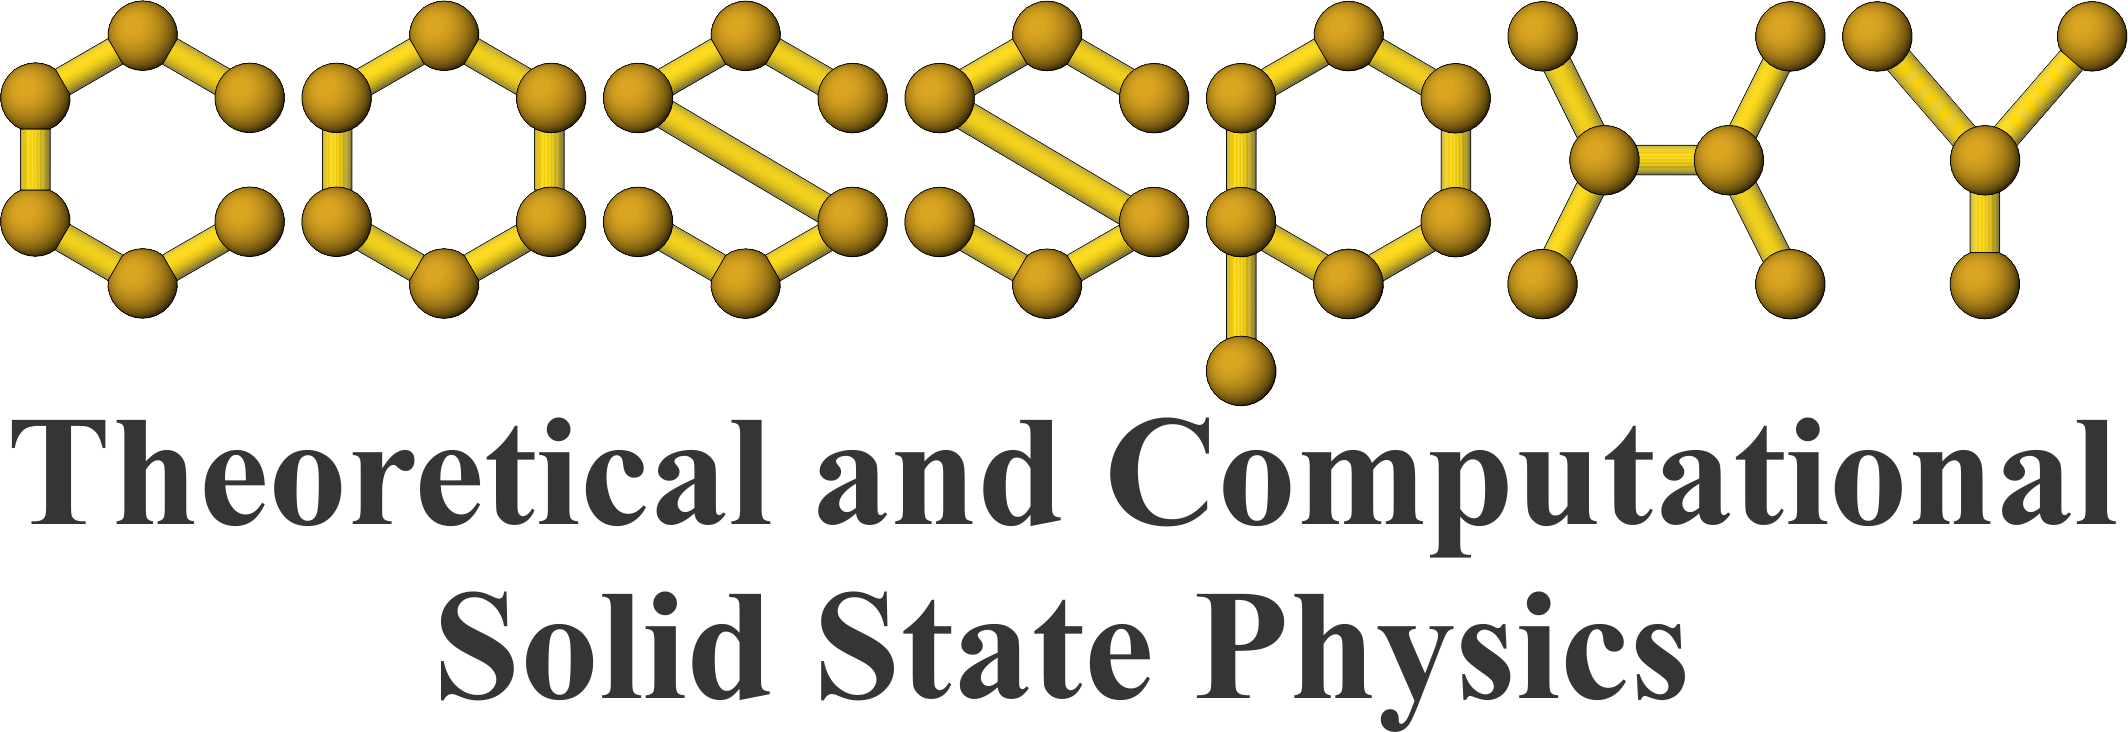 Theoretical and Computational Solid State Physics